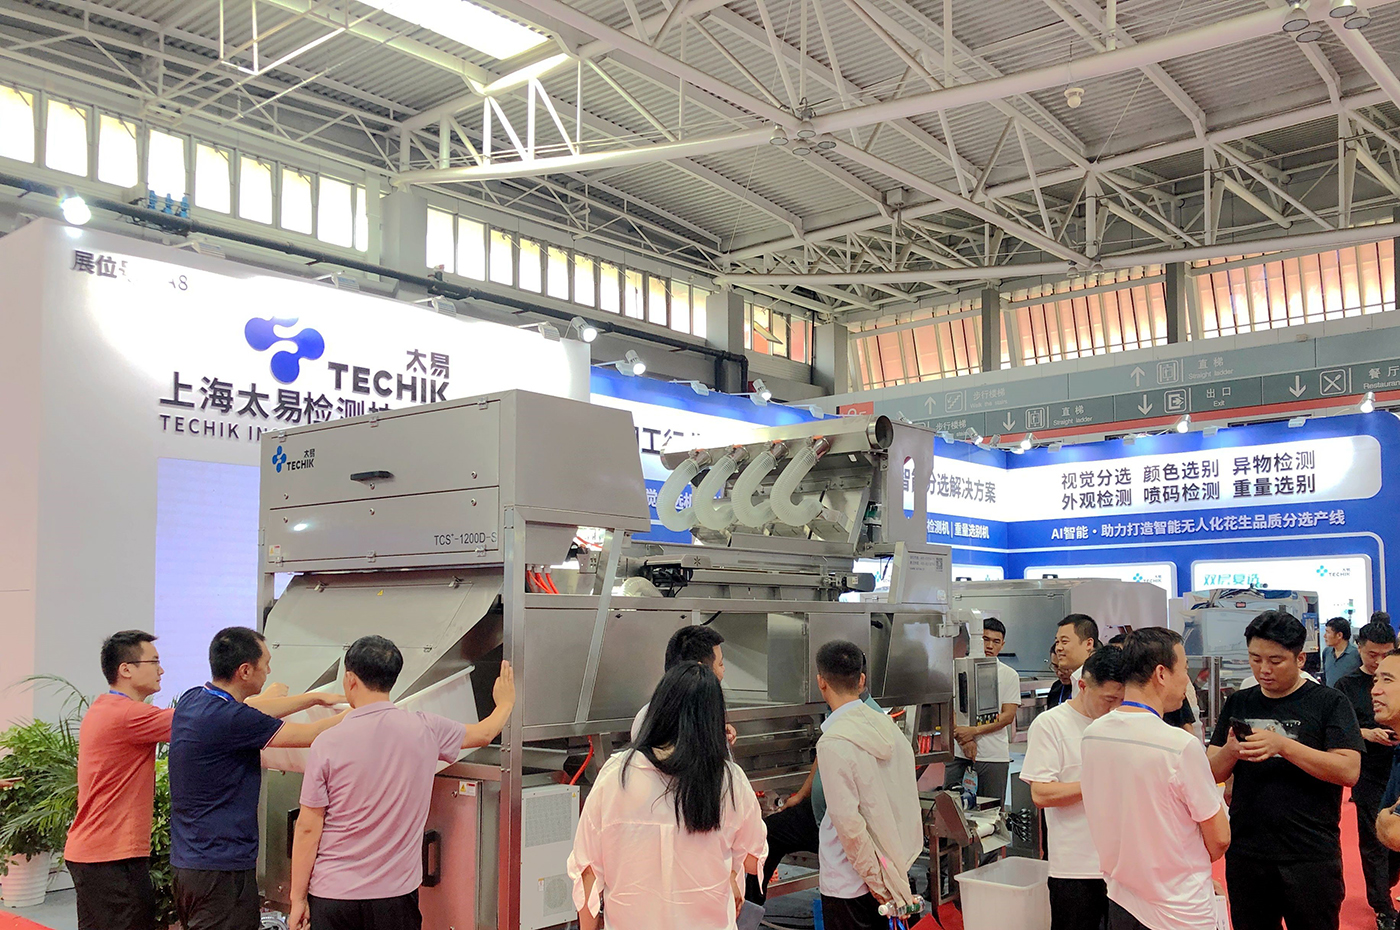 Experience the Future of Peanut Industry at the Peanut Trading Expo with Techik1